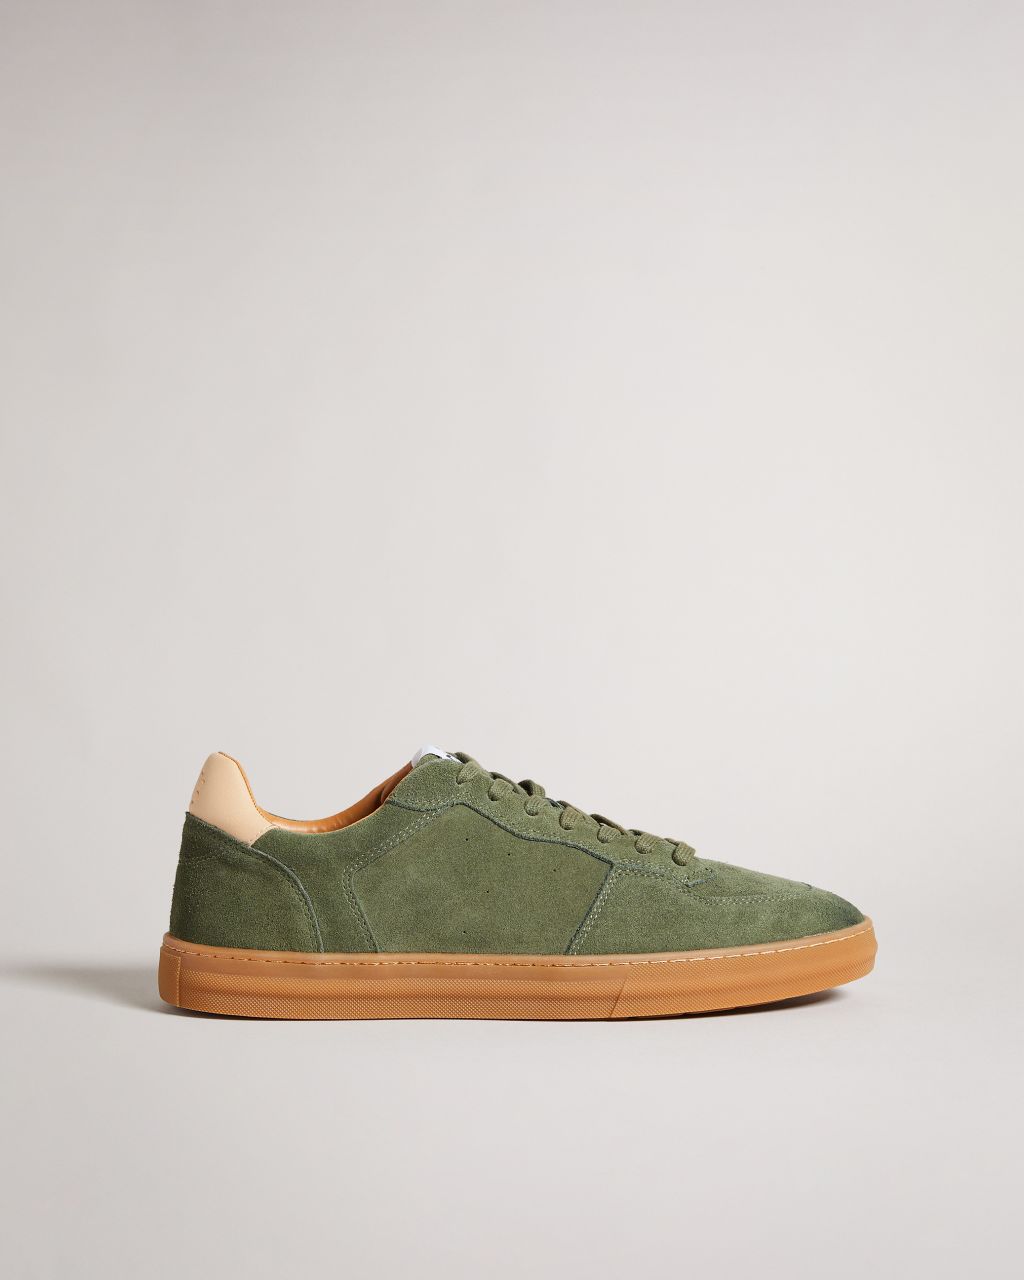 Ted Baker Men's Cupsole Suede Trainers in Khaki, Barkerr, Leather